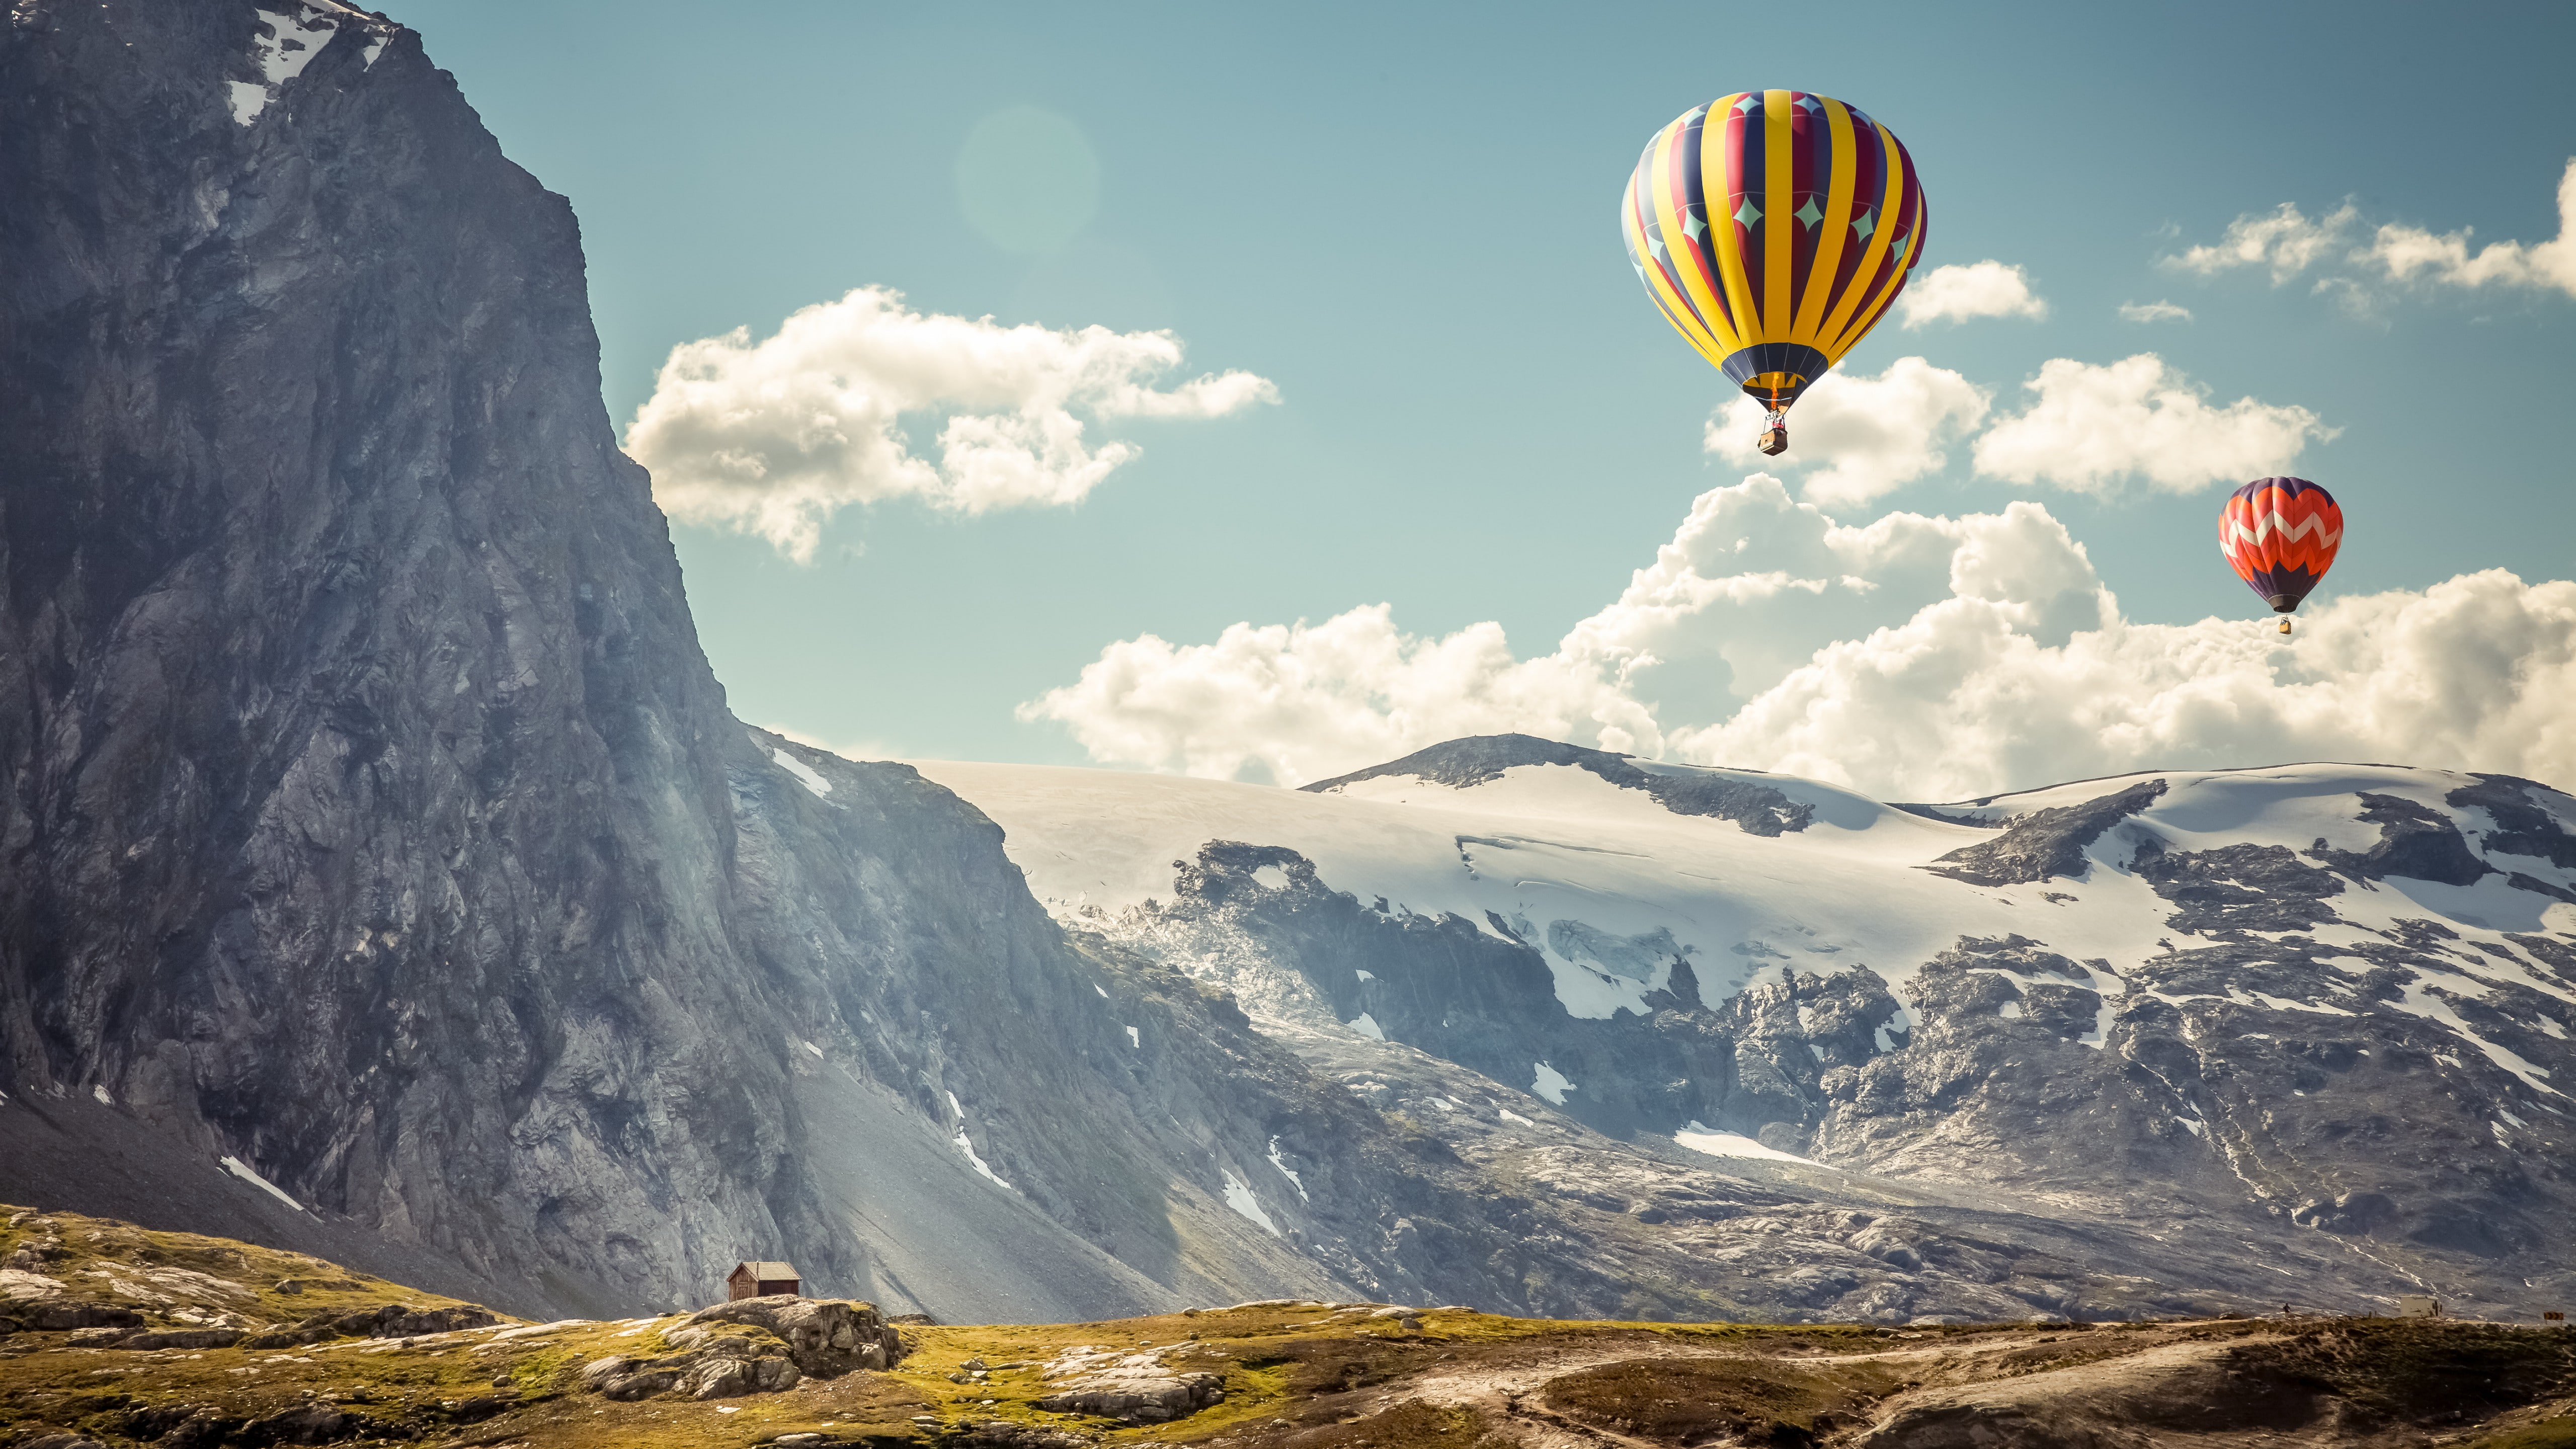 yellow and red hot air balloons during day time, Iceland, 4k